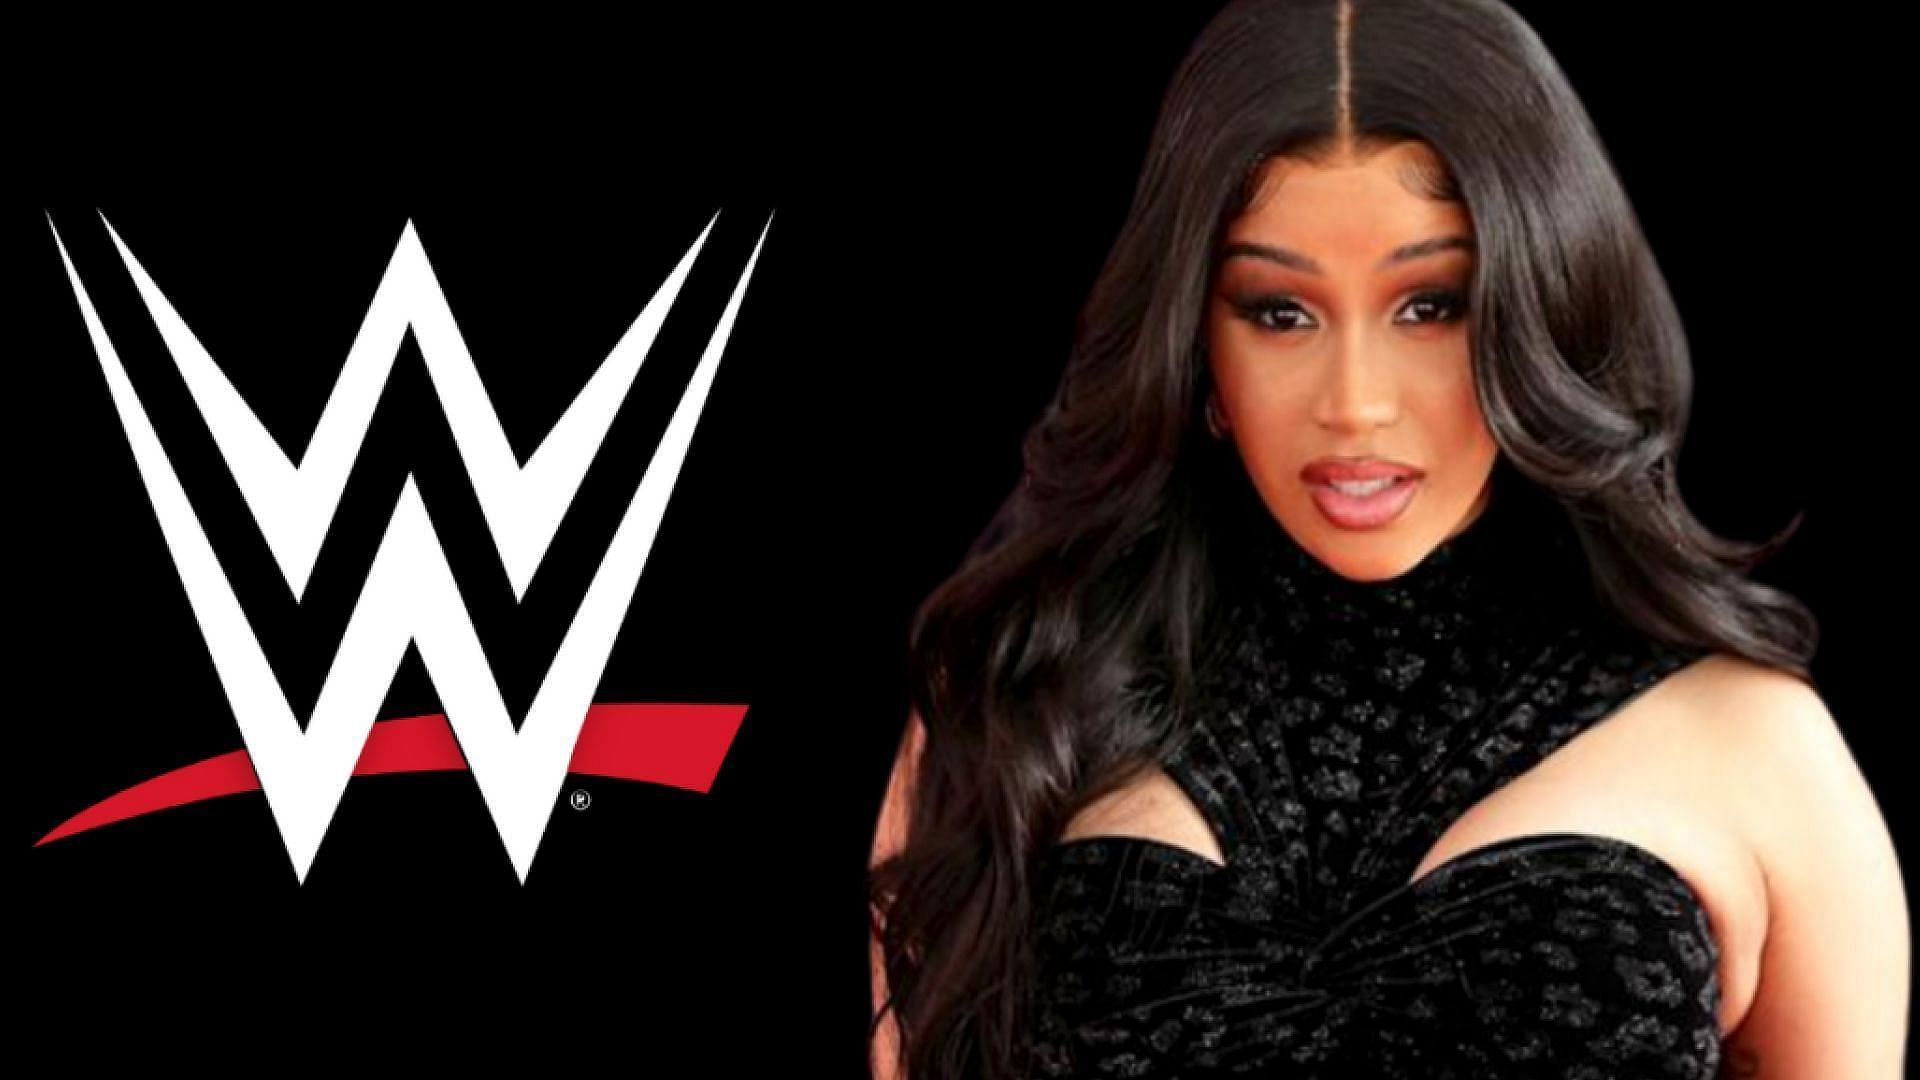 Cardi B has been vocal about her interest in WWE